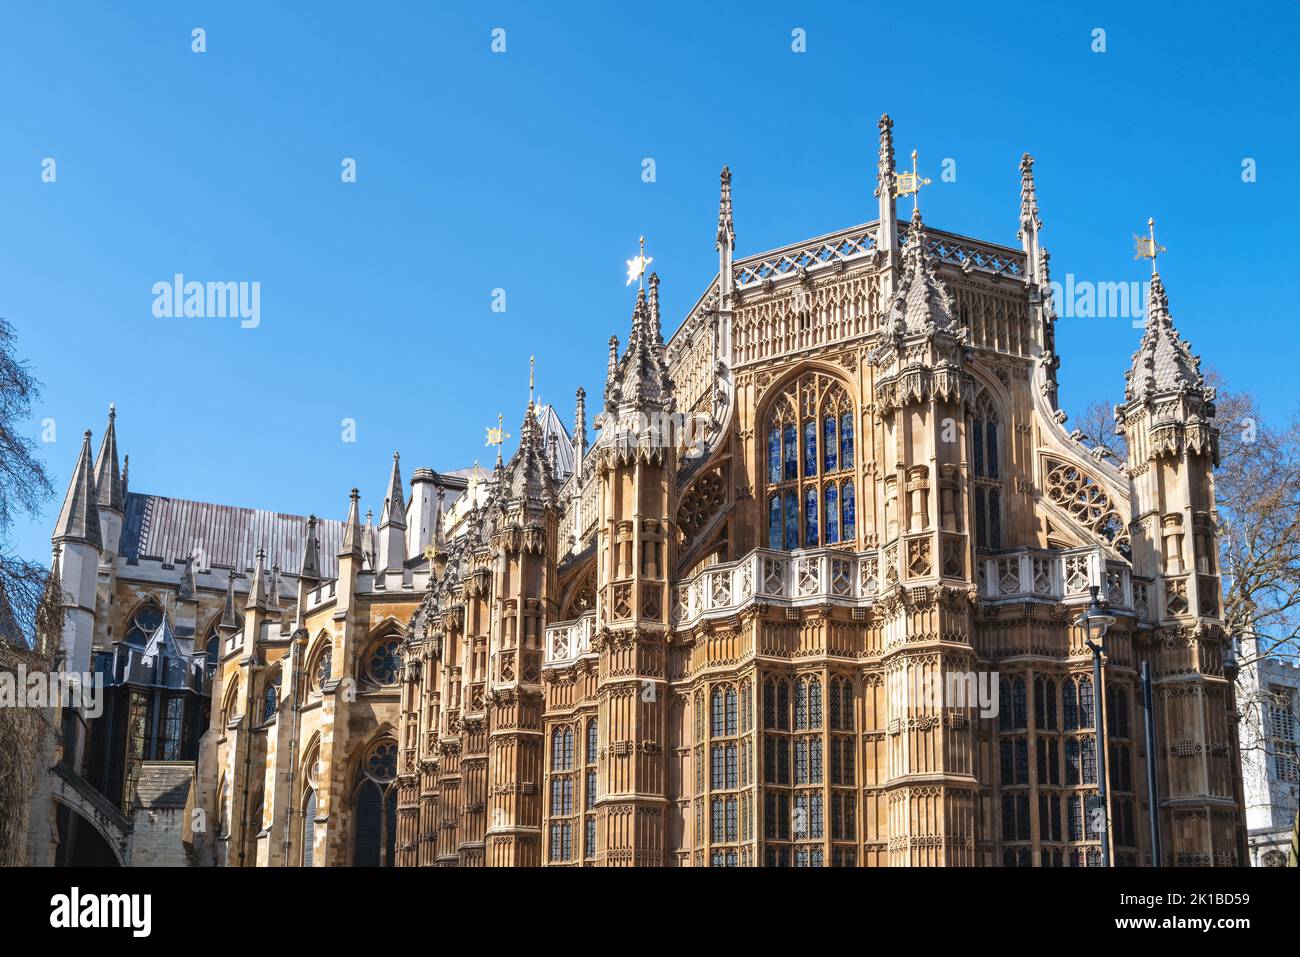 Westminster Abbey, London, famous as the site of many Royal weddings, coronations and burials. Detail of this medieval building against blue sky backg Stock Photo